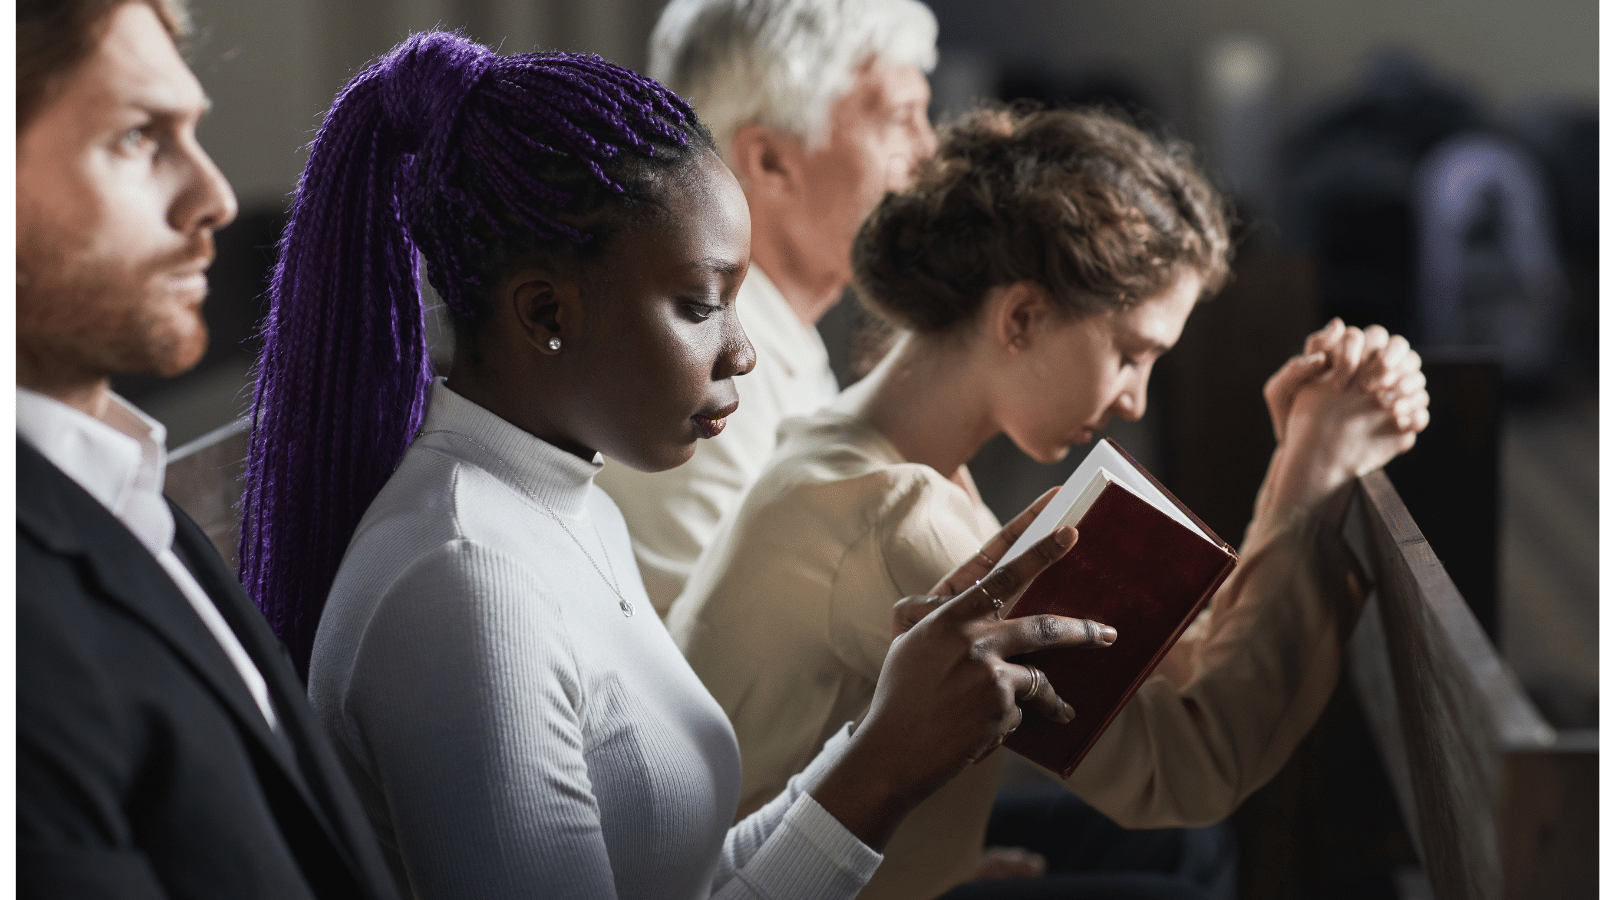 Women sitting next to their husbands in church, one woman praying, one woman reading her Bible.